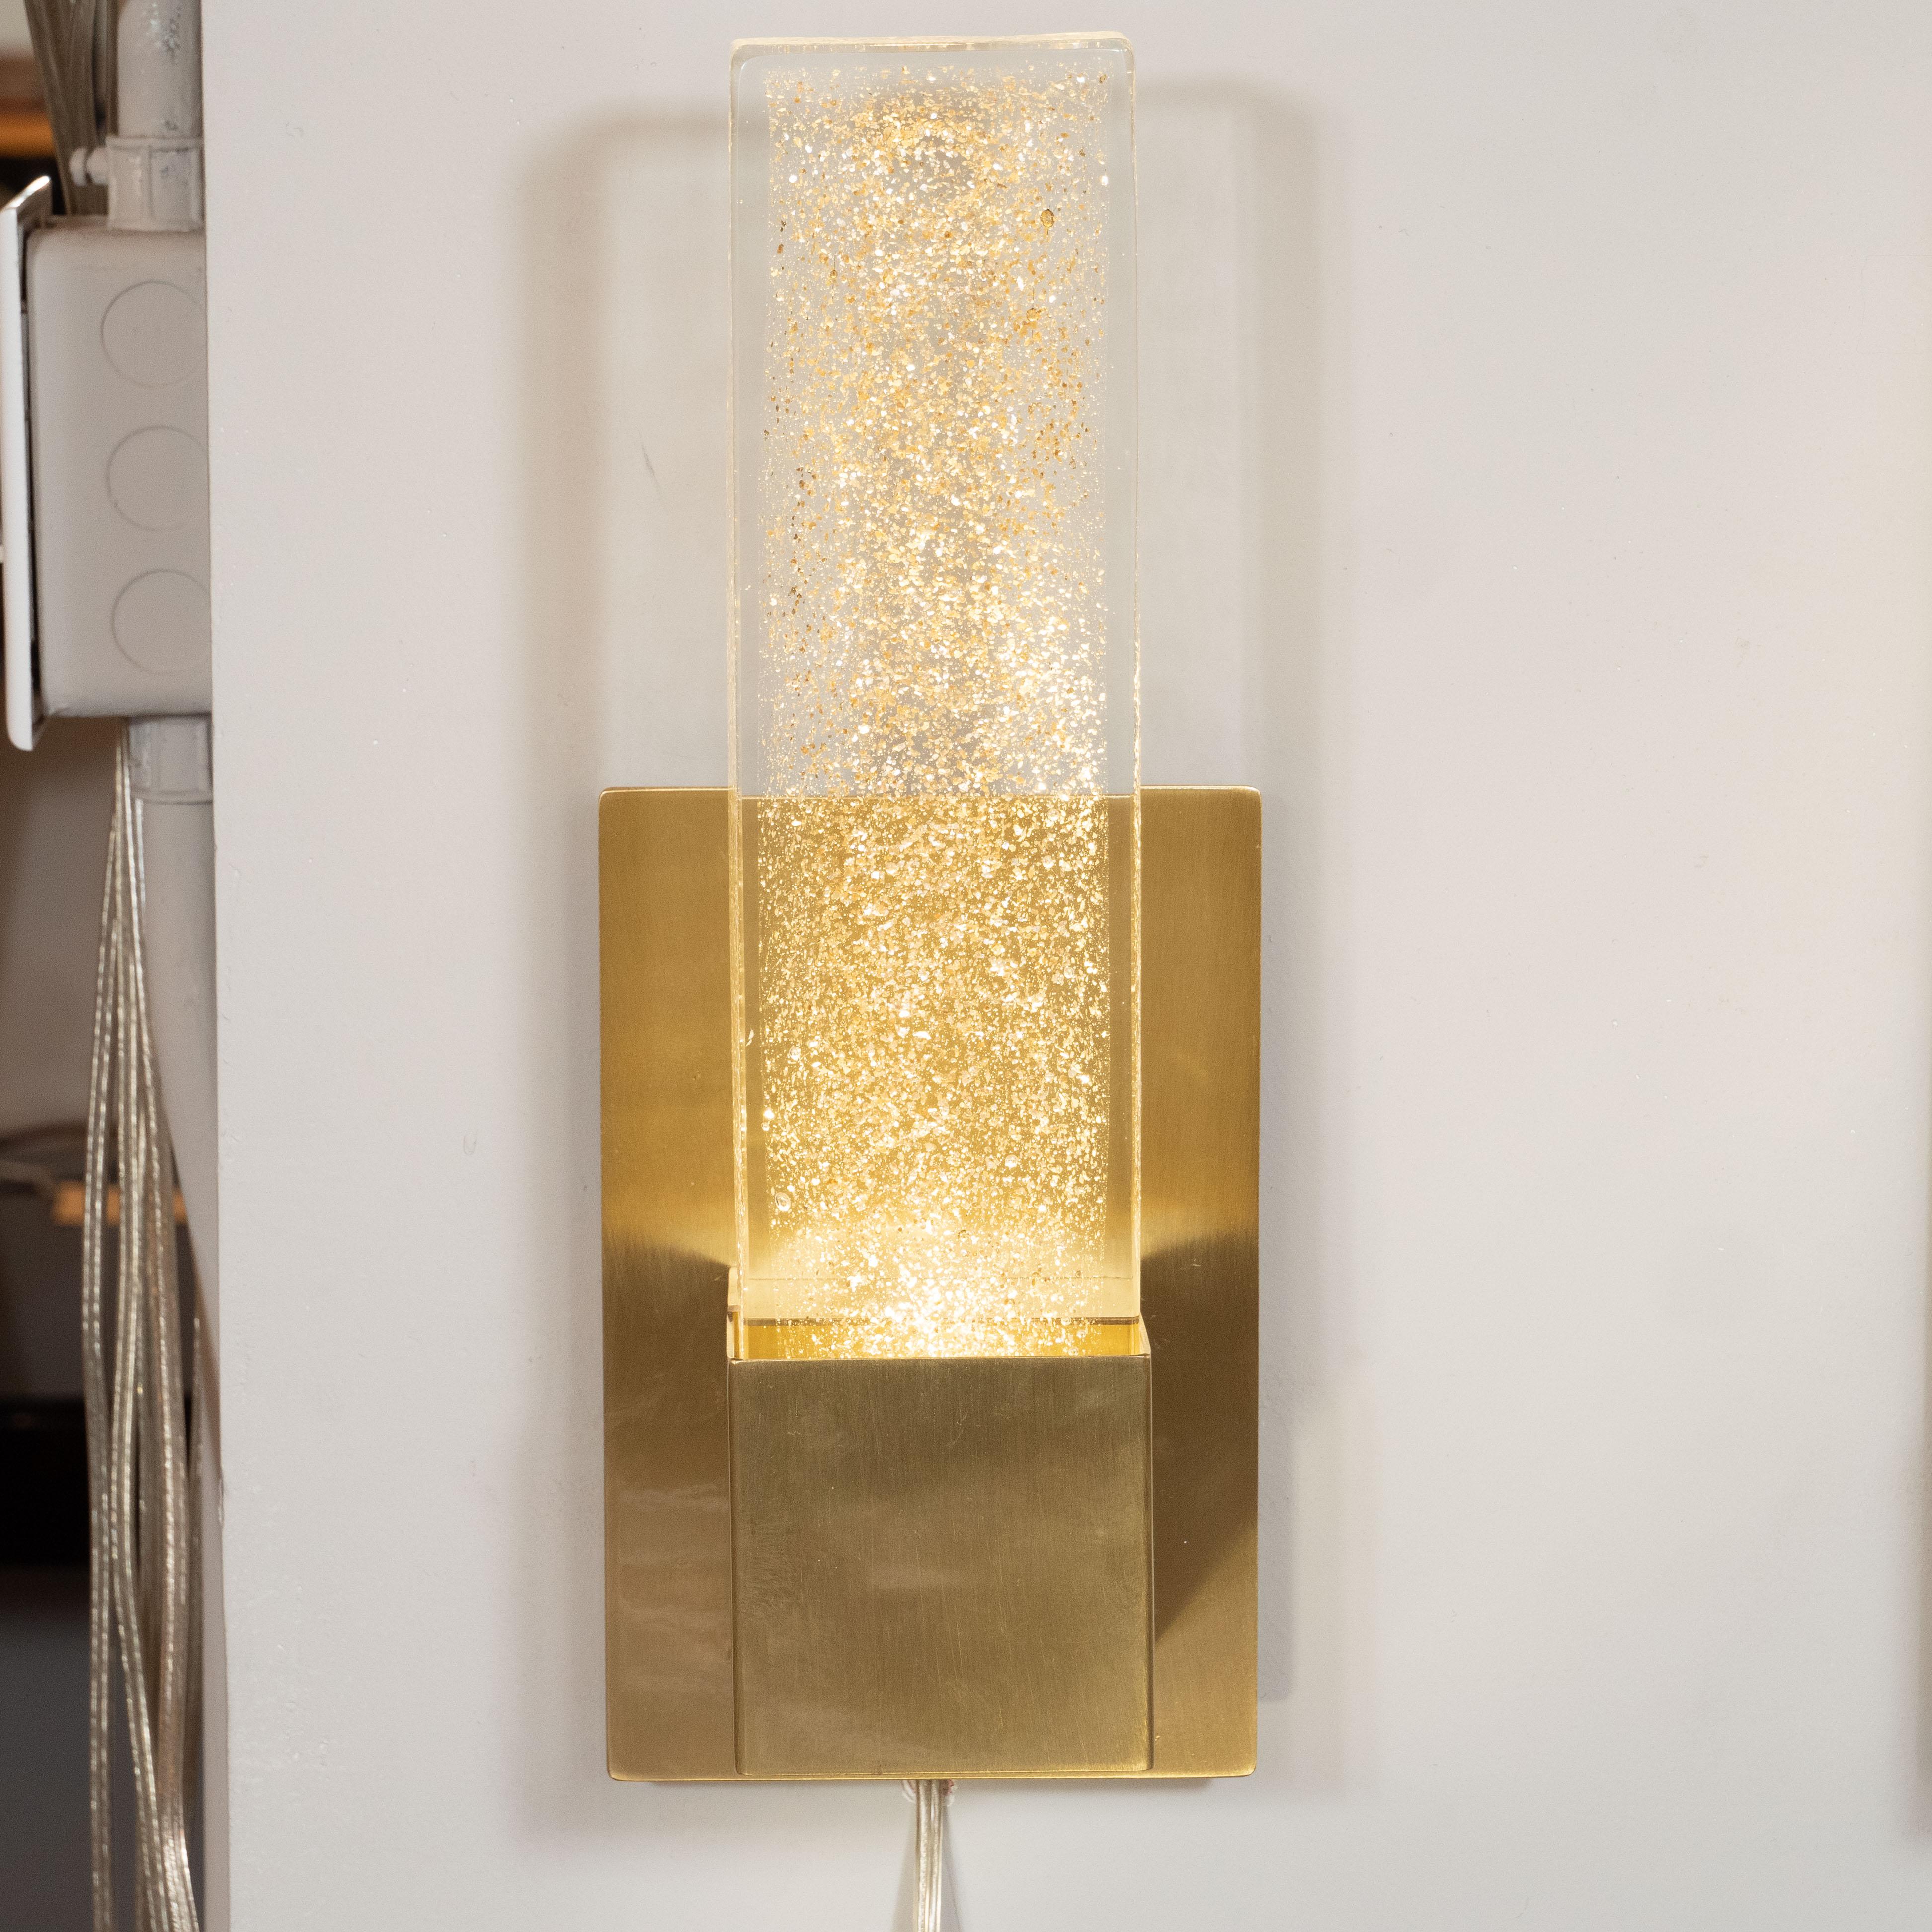 This stunning pair of modernist sconces were realized in Murano, Italy- the island off the coast of Venice renowned for centuries for its superlative glass production. They feature volumetric rectangular bodies imbued with an abundance of 24-karat